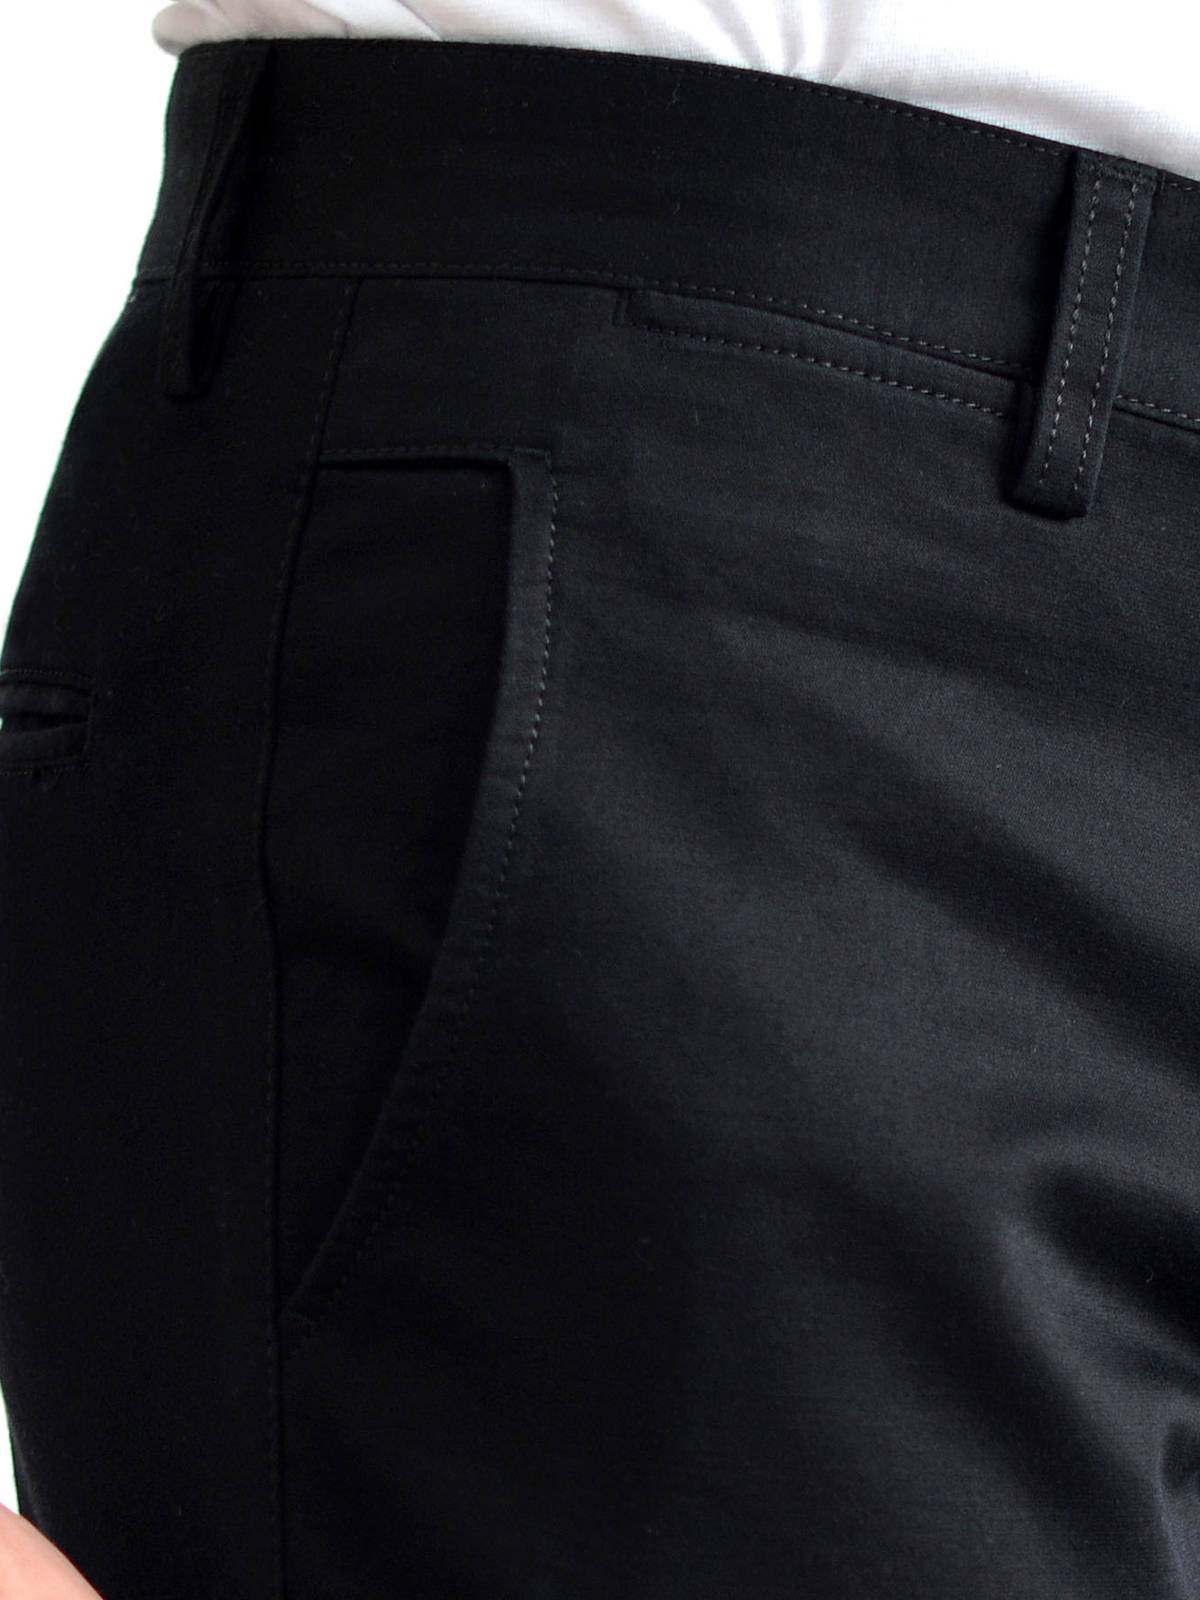 Black pants made of cotton and elastane - 60172 € 11.25 img3